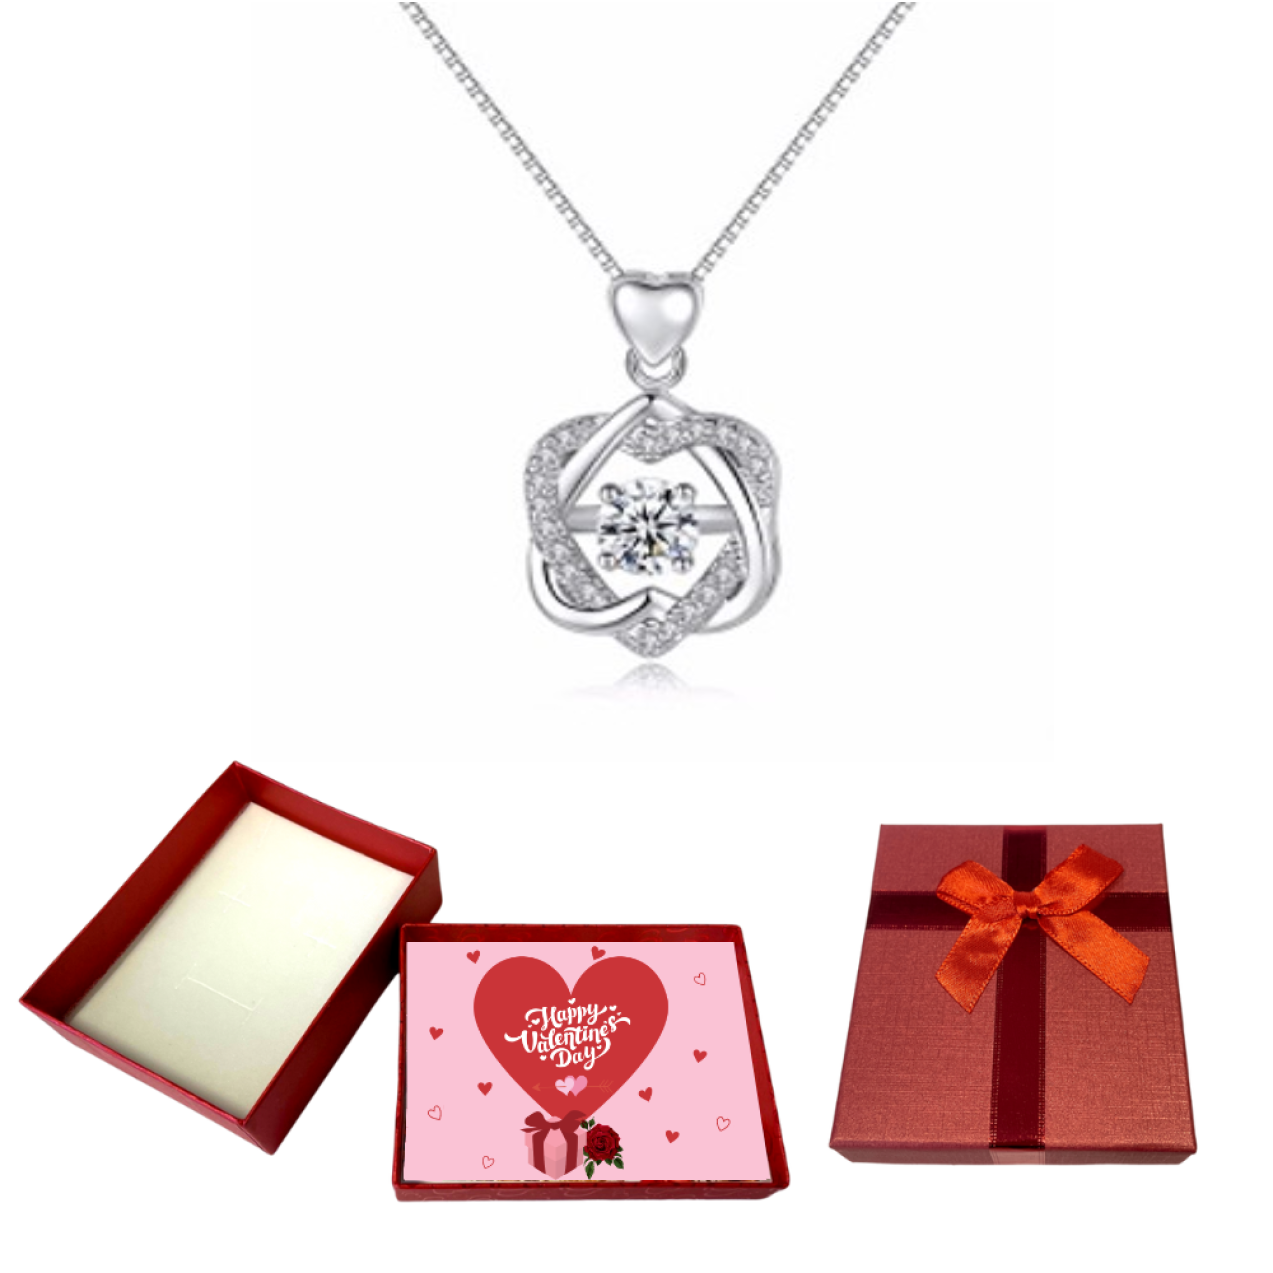 10 pcs - Stunning Silver tone Two loves in one Crystal Pendant Necklace With Valentine Gift Box|GCJ220-Valentine Box|UK SELLER